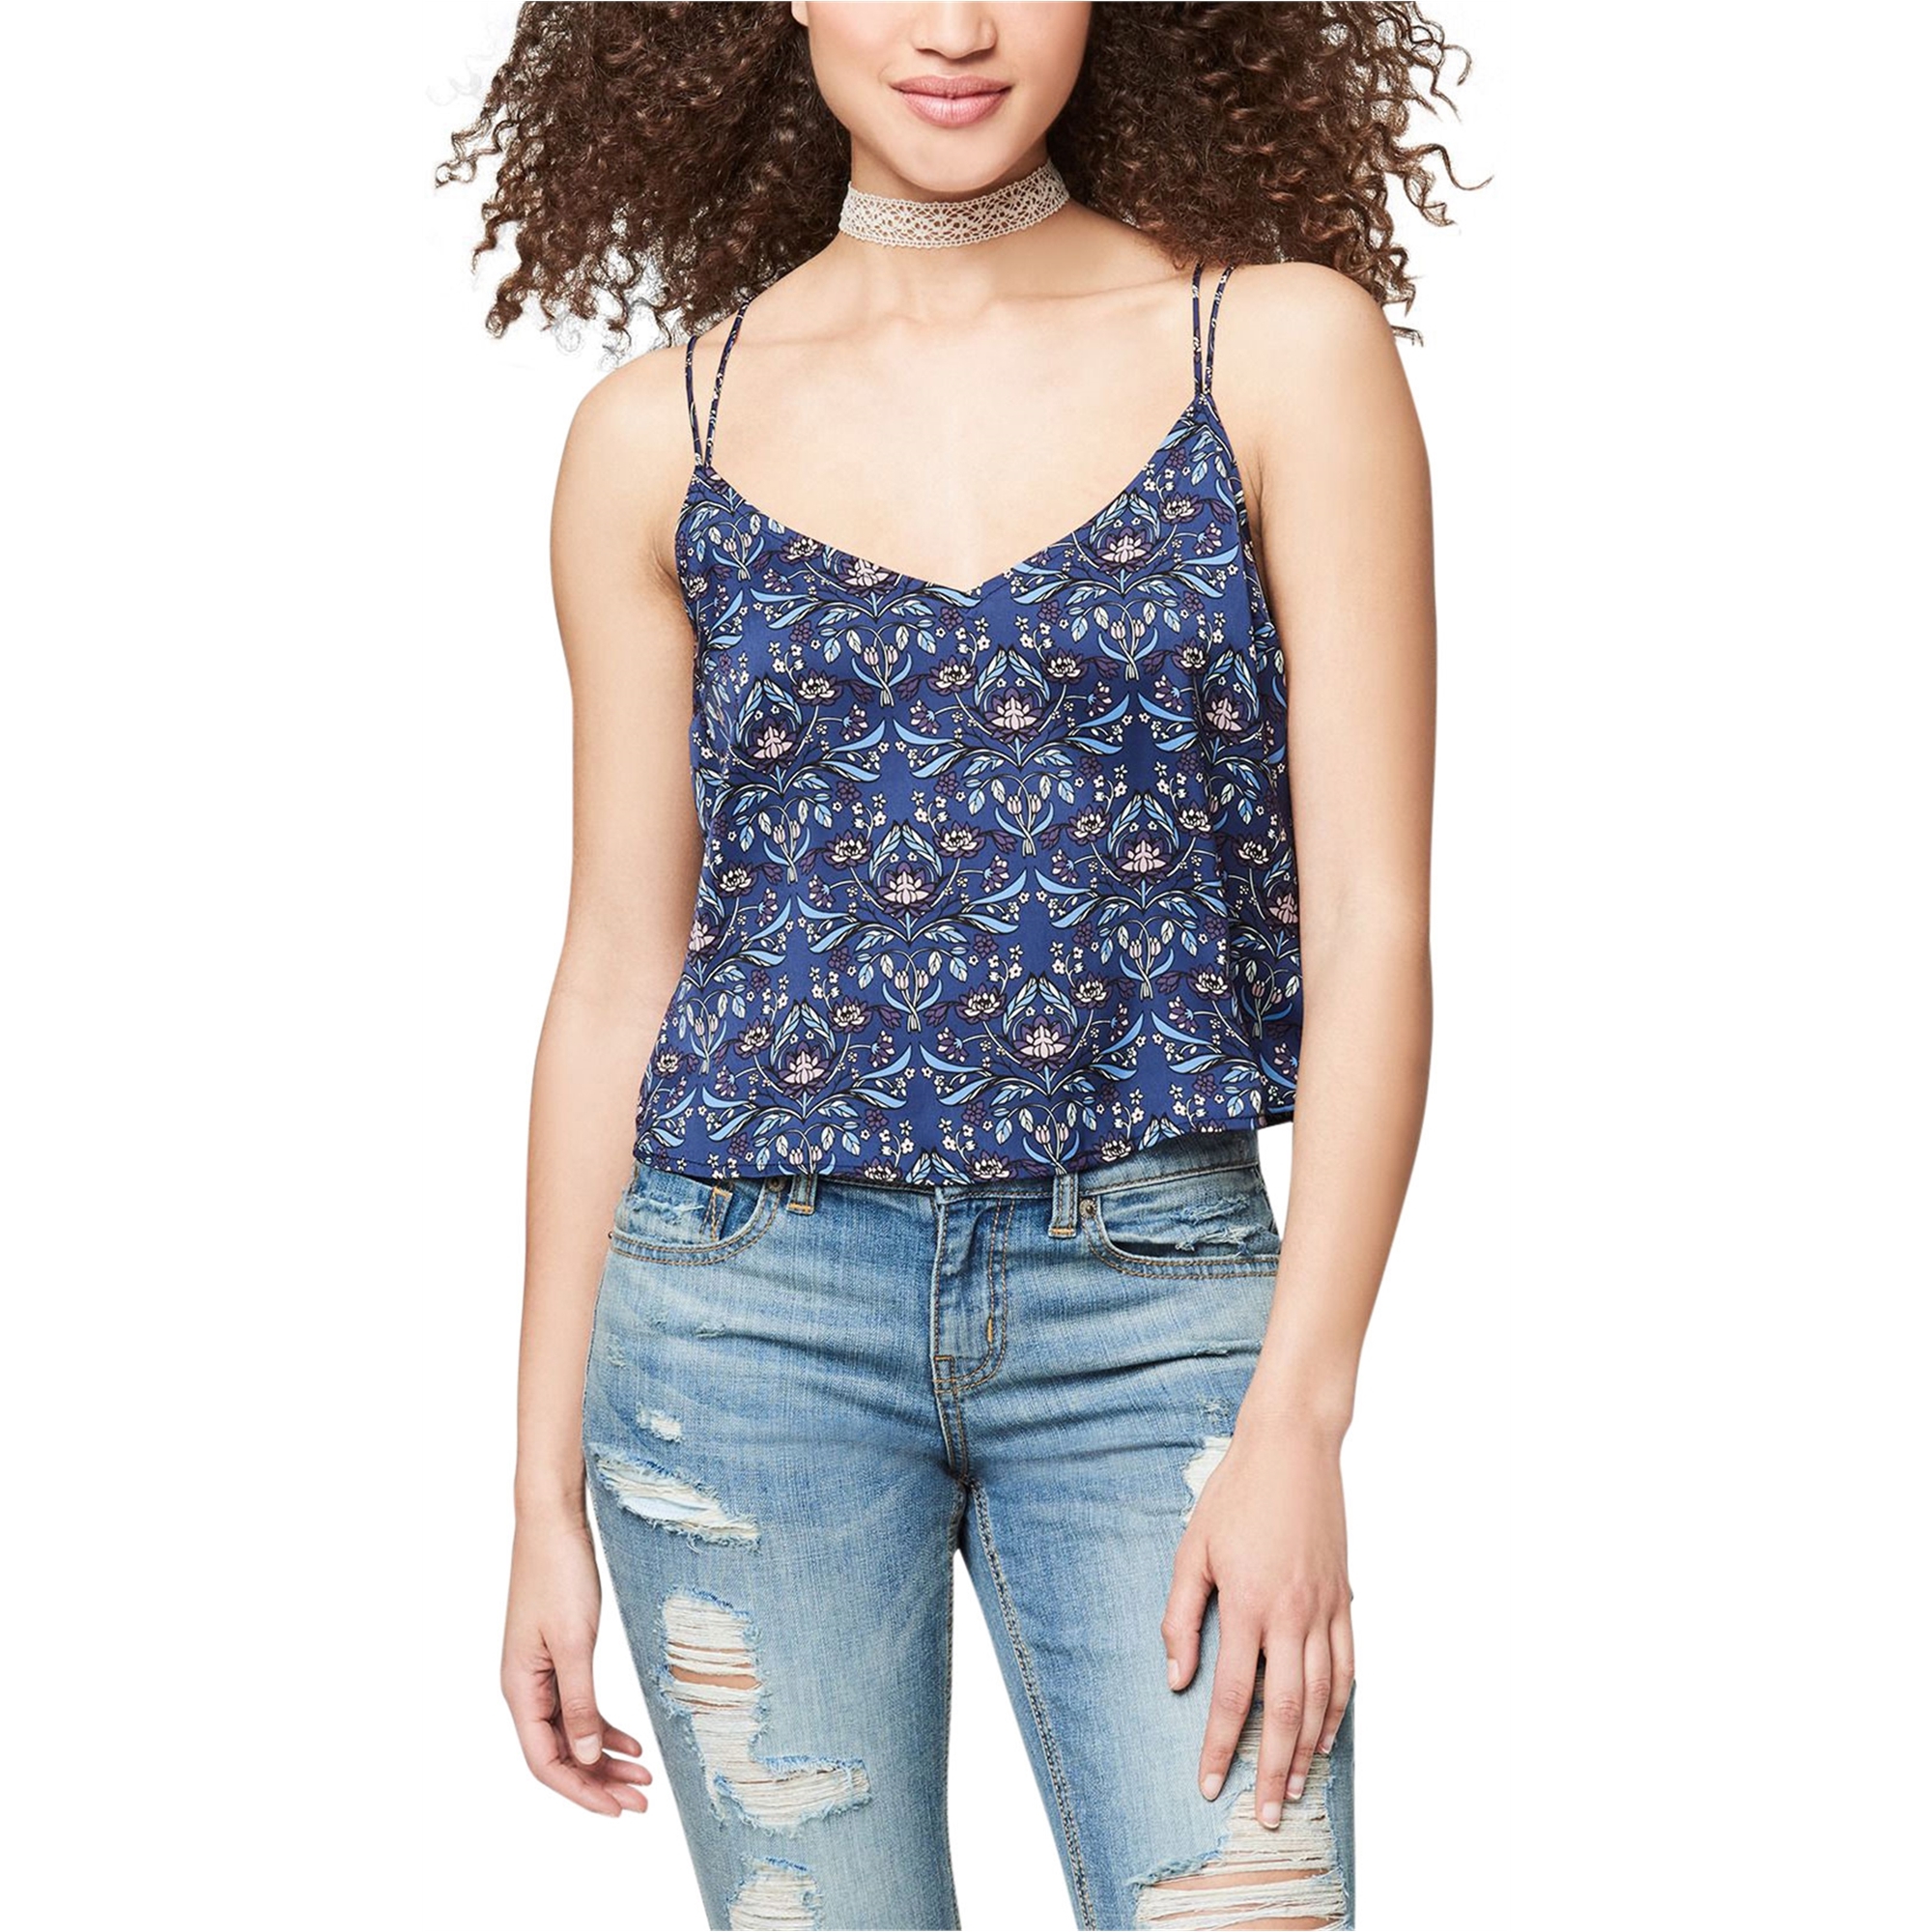 Buy a Aeropostale Womens Strappy Cami Tank Top